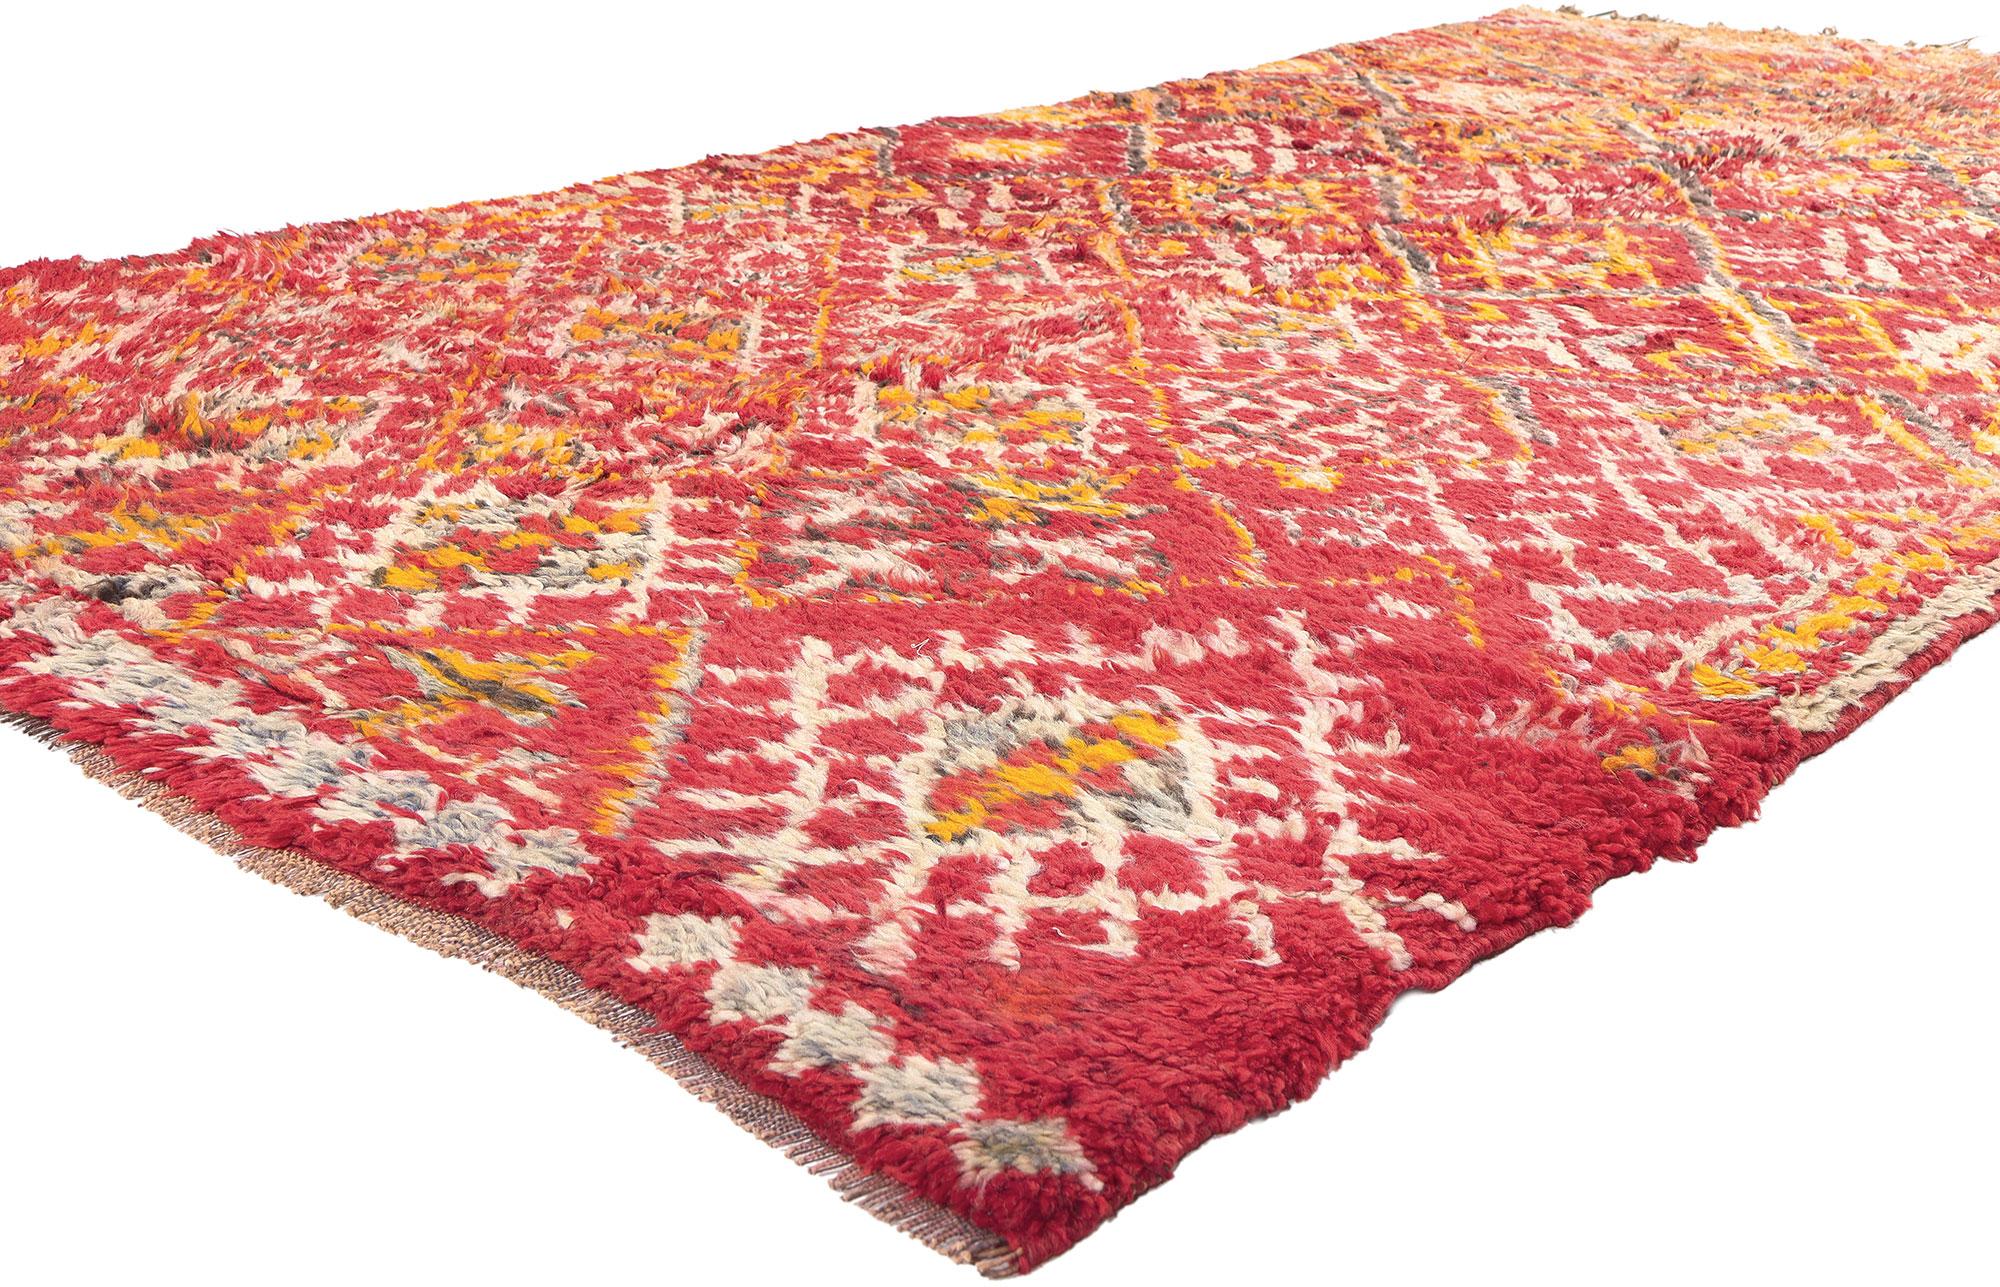 20944 Vintage Red Beni MGuild Moroccan Rug, 05'08 x 10'02.  This vintage Beni MGuild rug stands as a testament to the rich culture of Moroccan craftsmanship, meticulously handwoven by the skilled artisans of the Beni MGuild tribe—a distinct subset